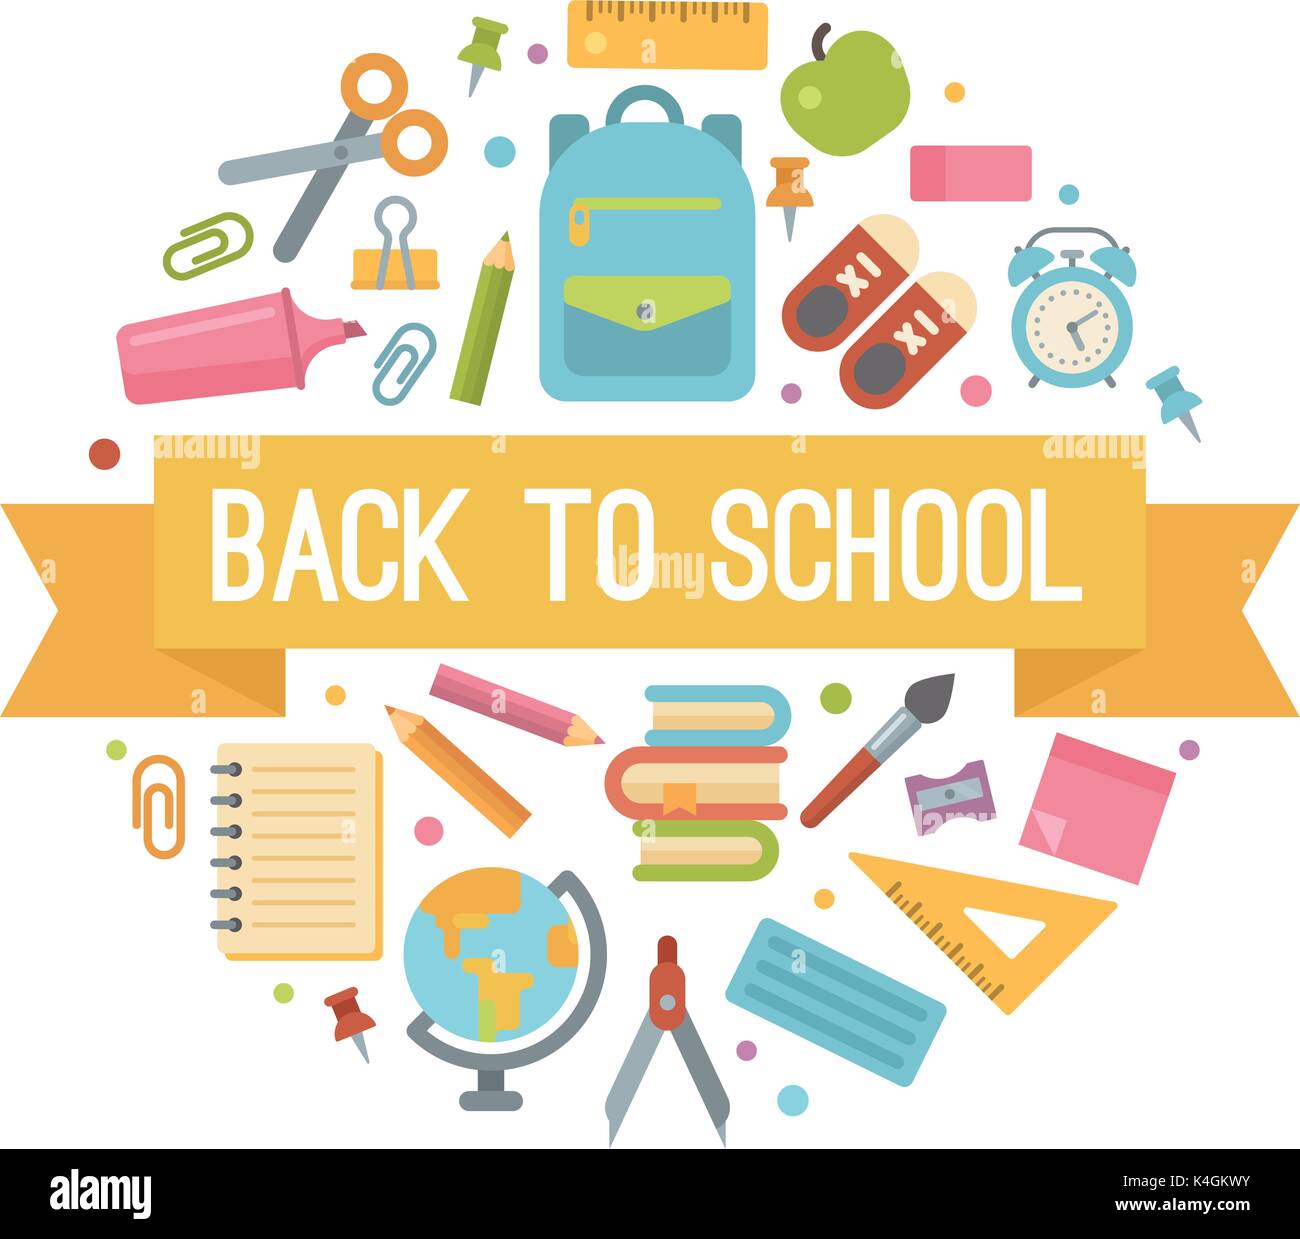 Back to school flat icons in a circle Stock Vector